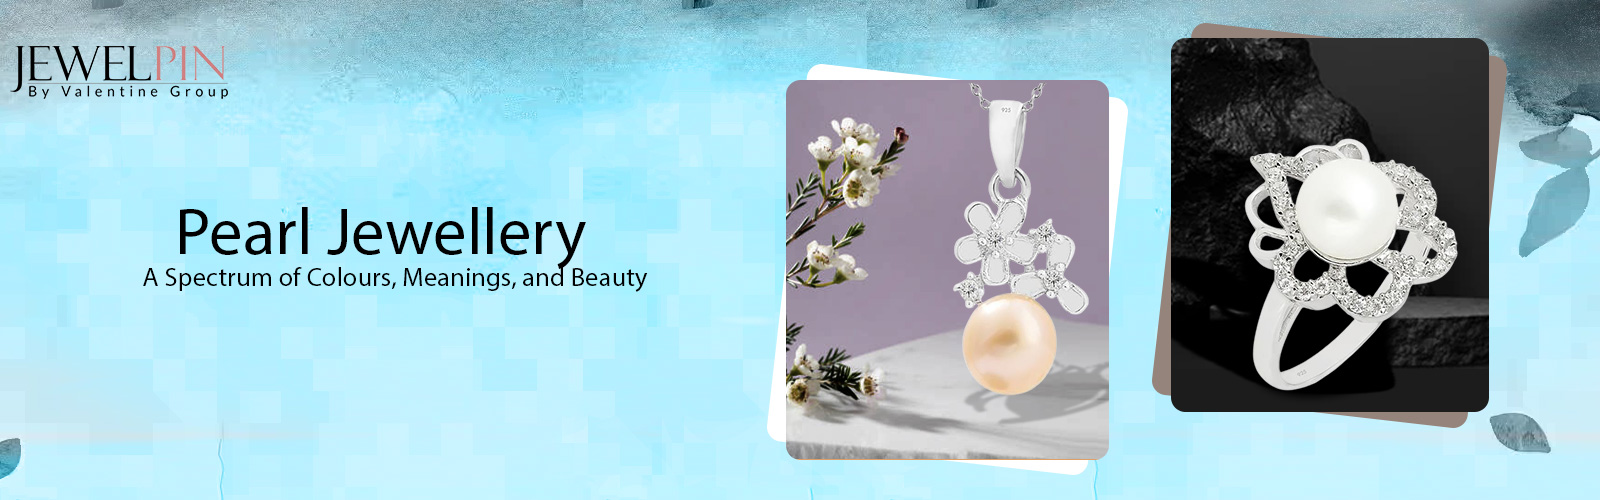 Pearl Jewellery A Spectrum of Colours, Meanings, and Beauty - JewelPin